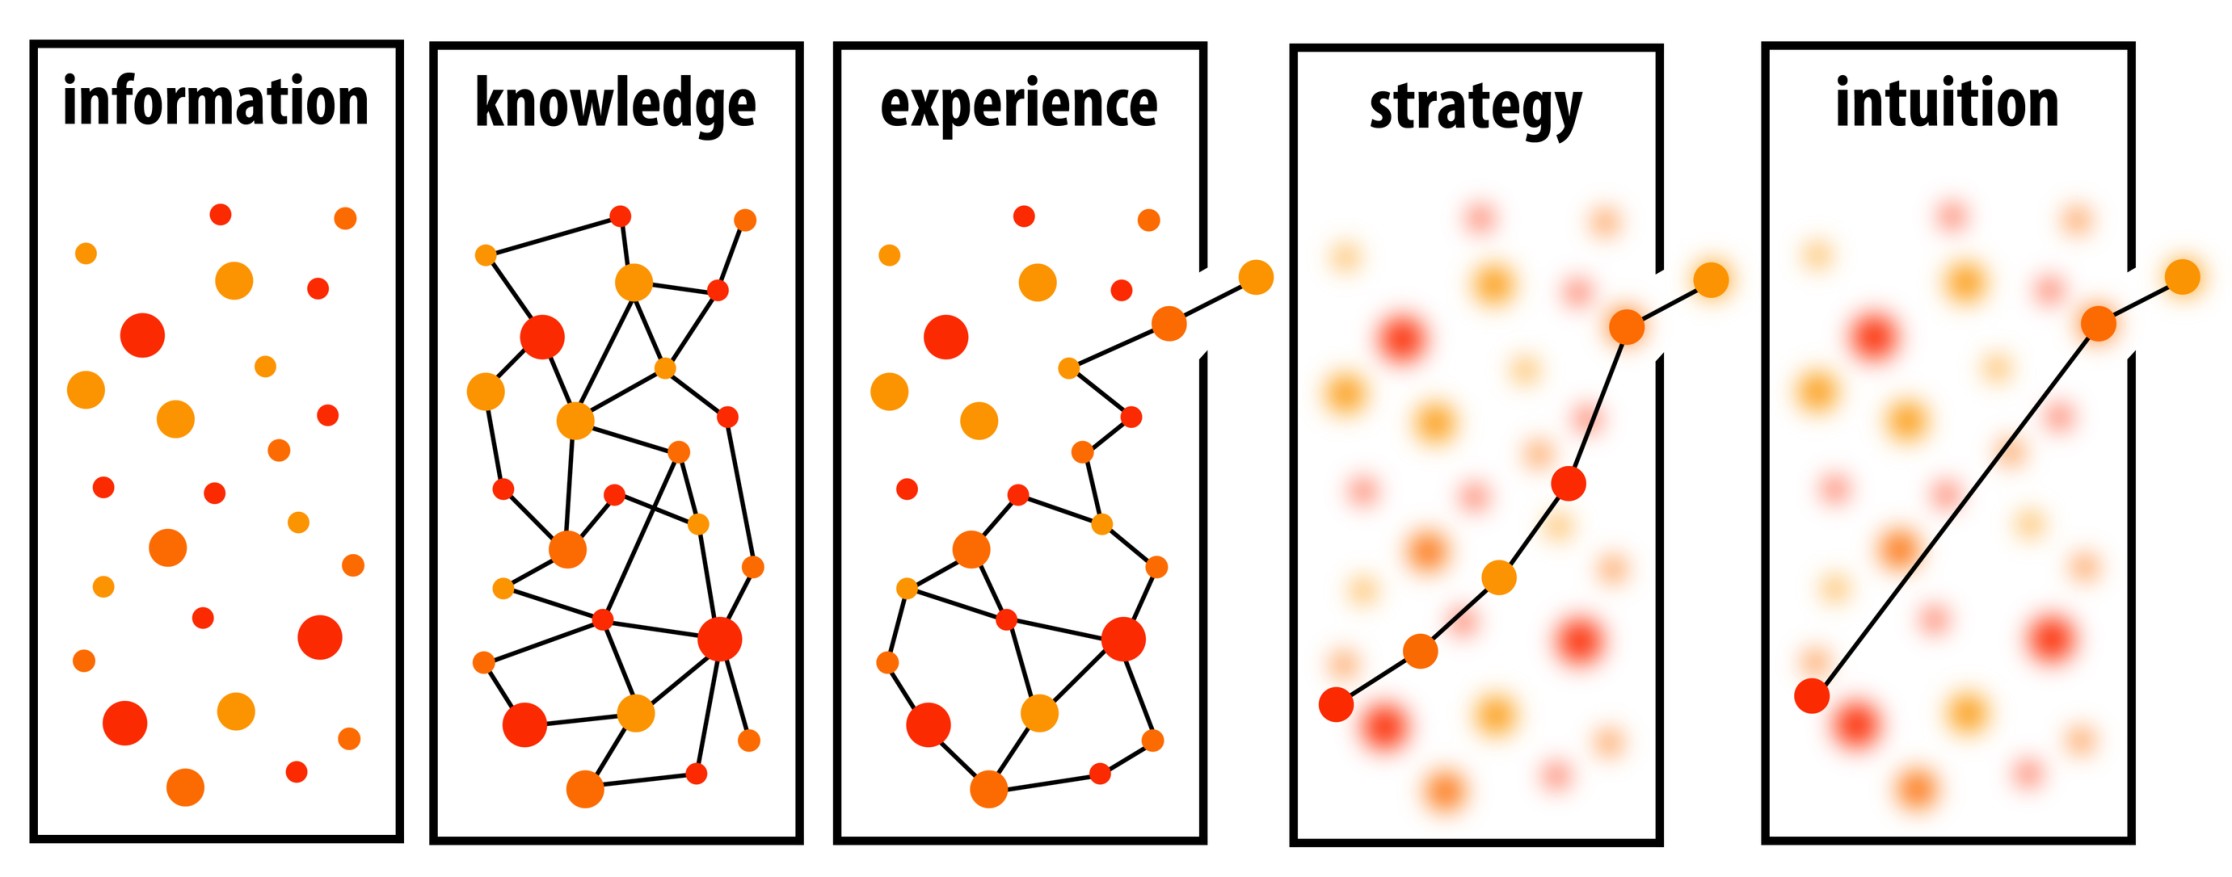 The difference between information knowledge and experience